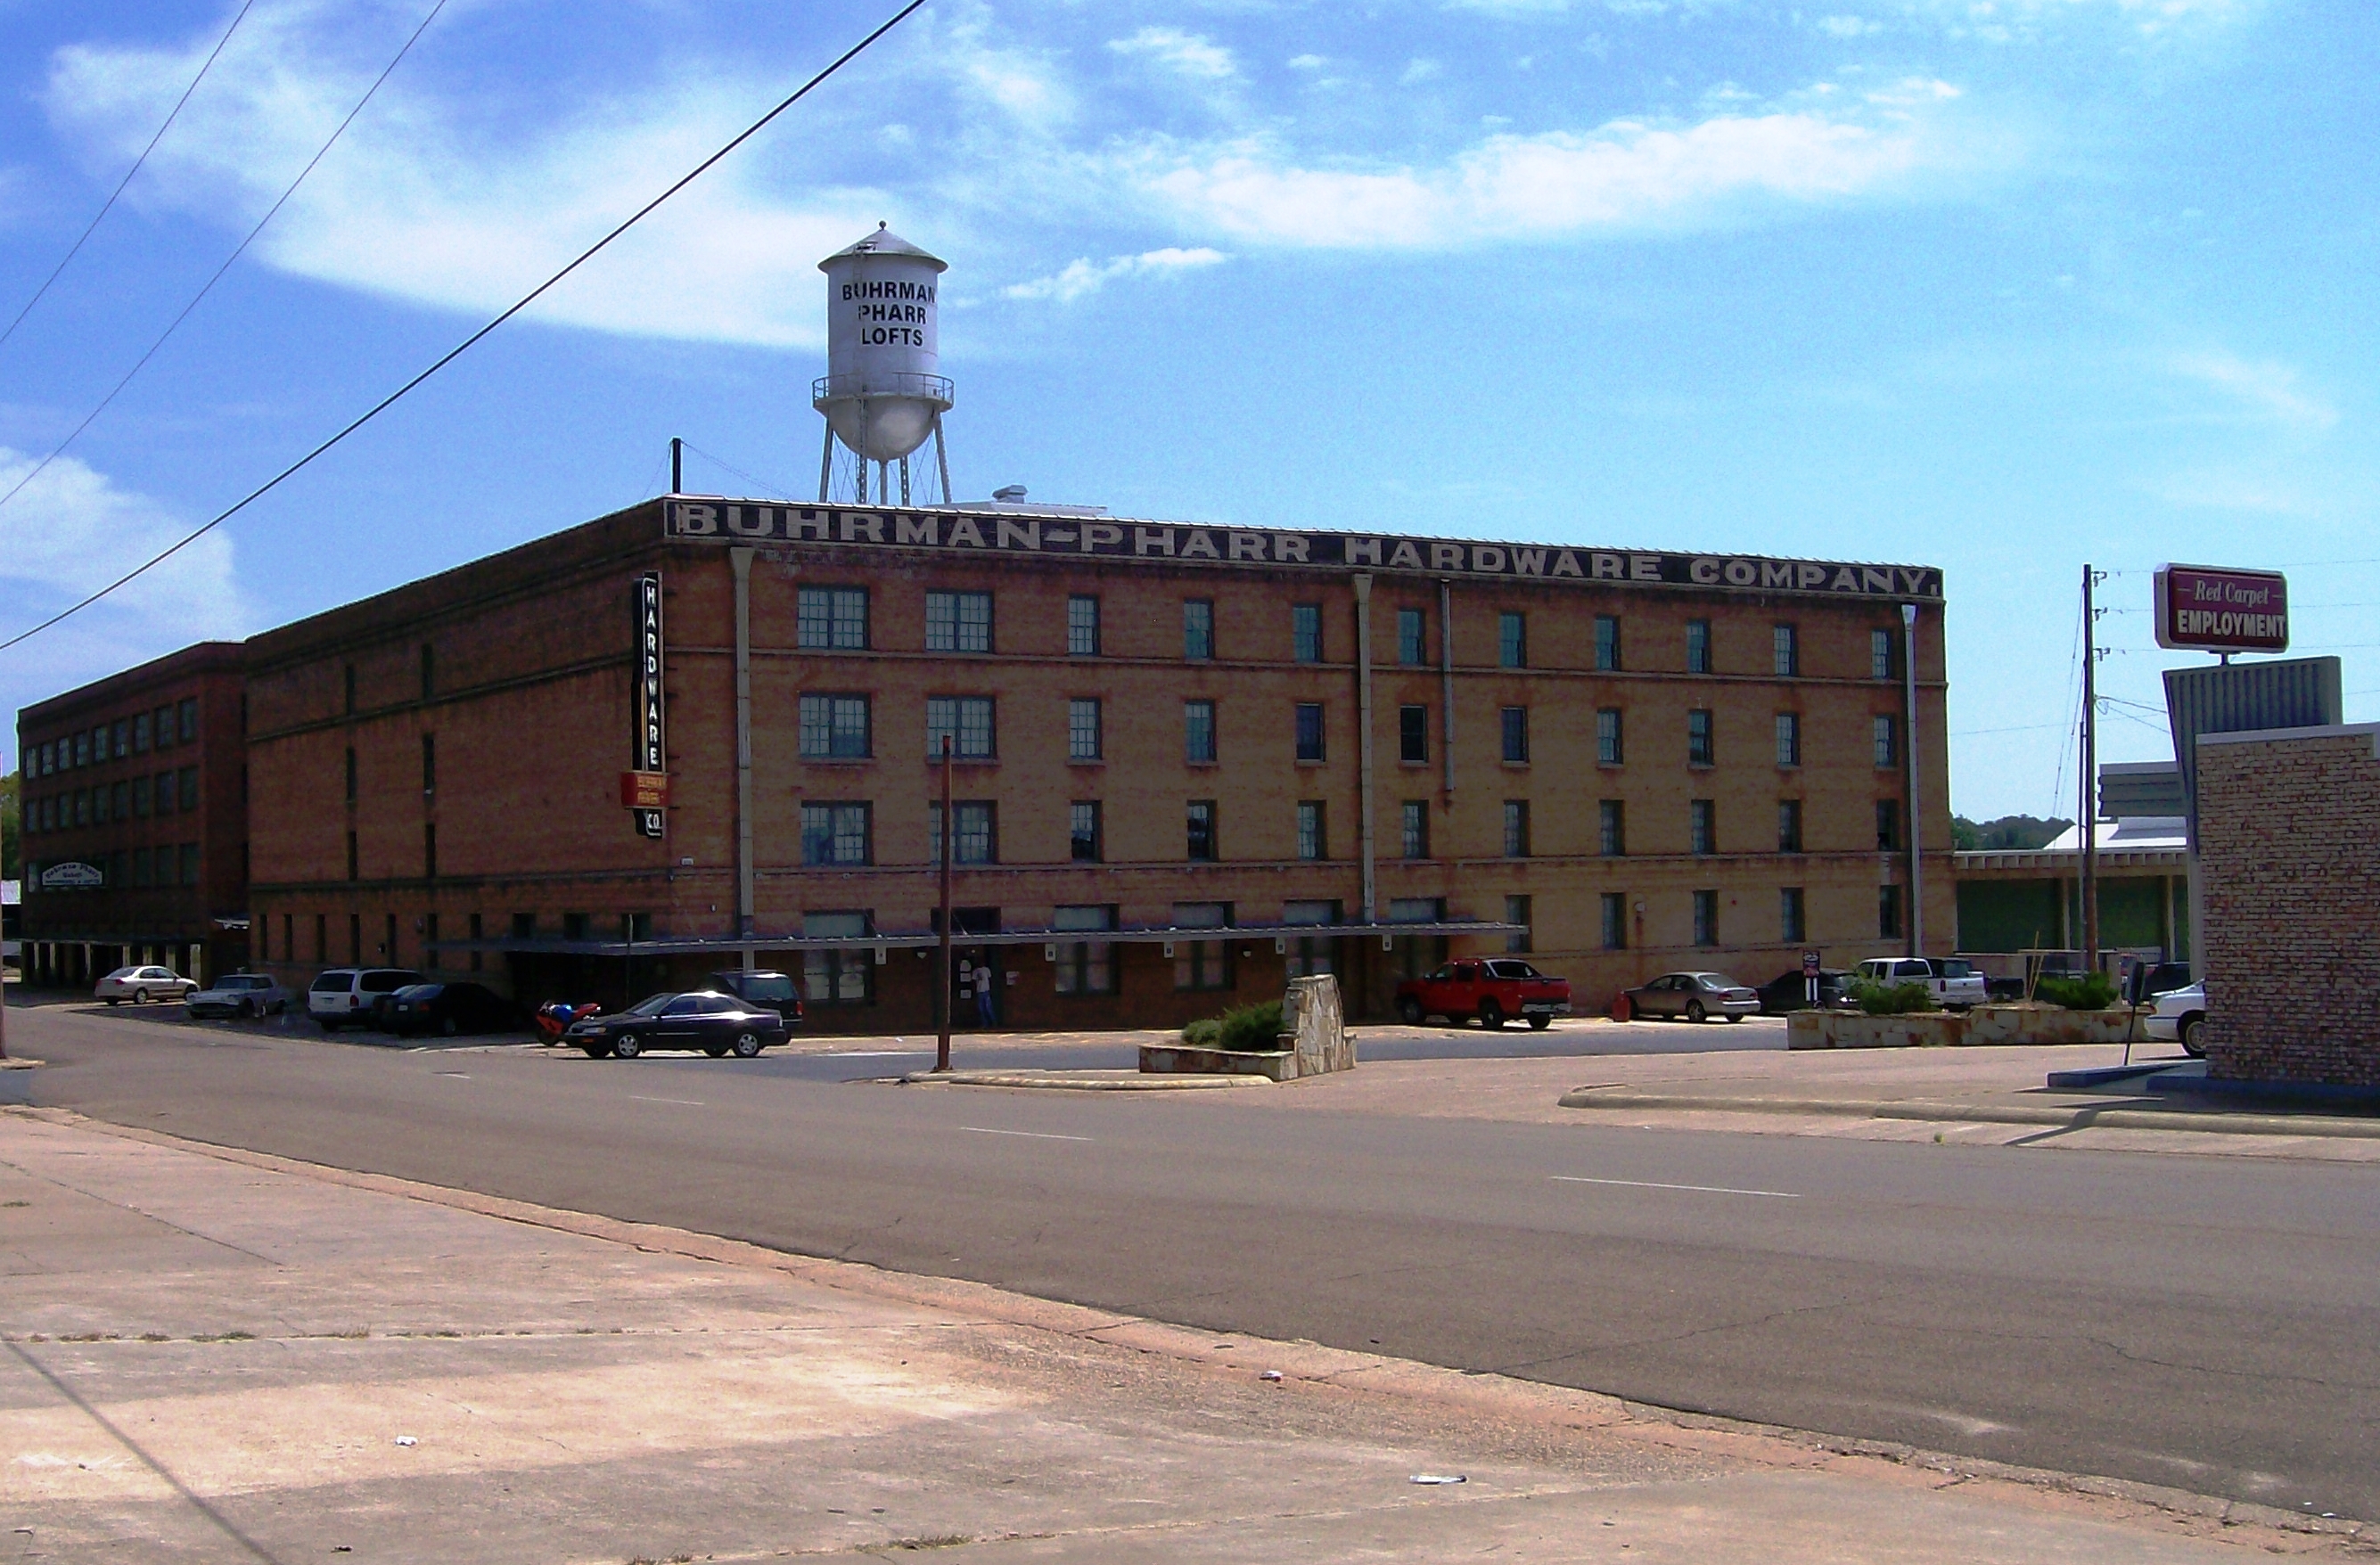 The Buhrman Pharr Hardware Company building is being used as loft apartments, giving new life to the historic building in Texarkana.